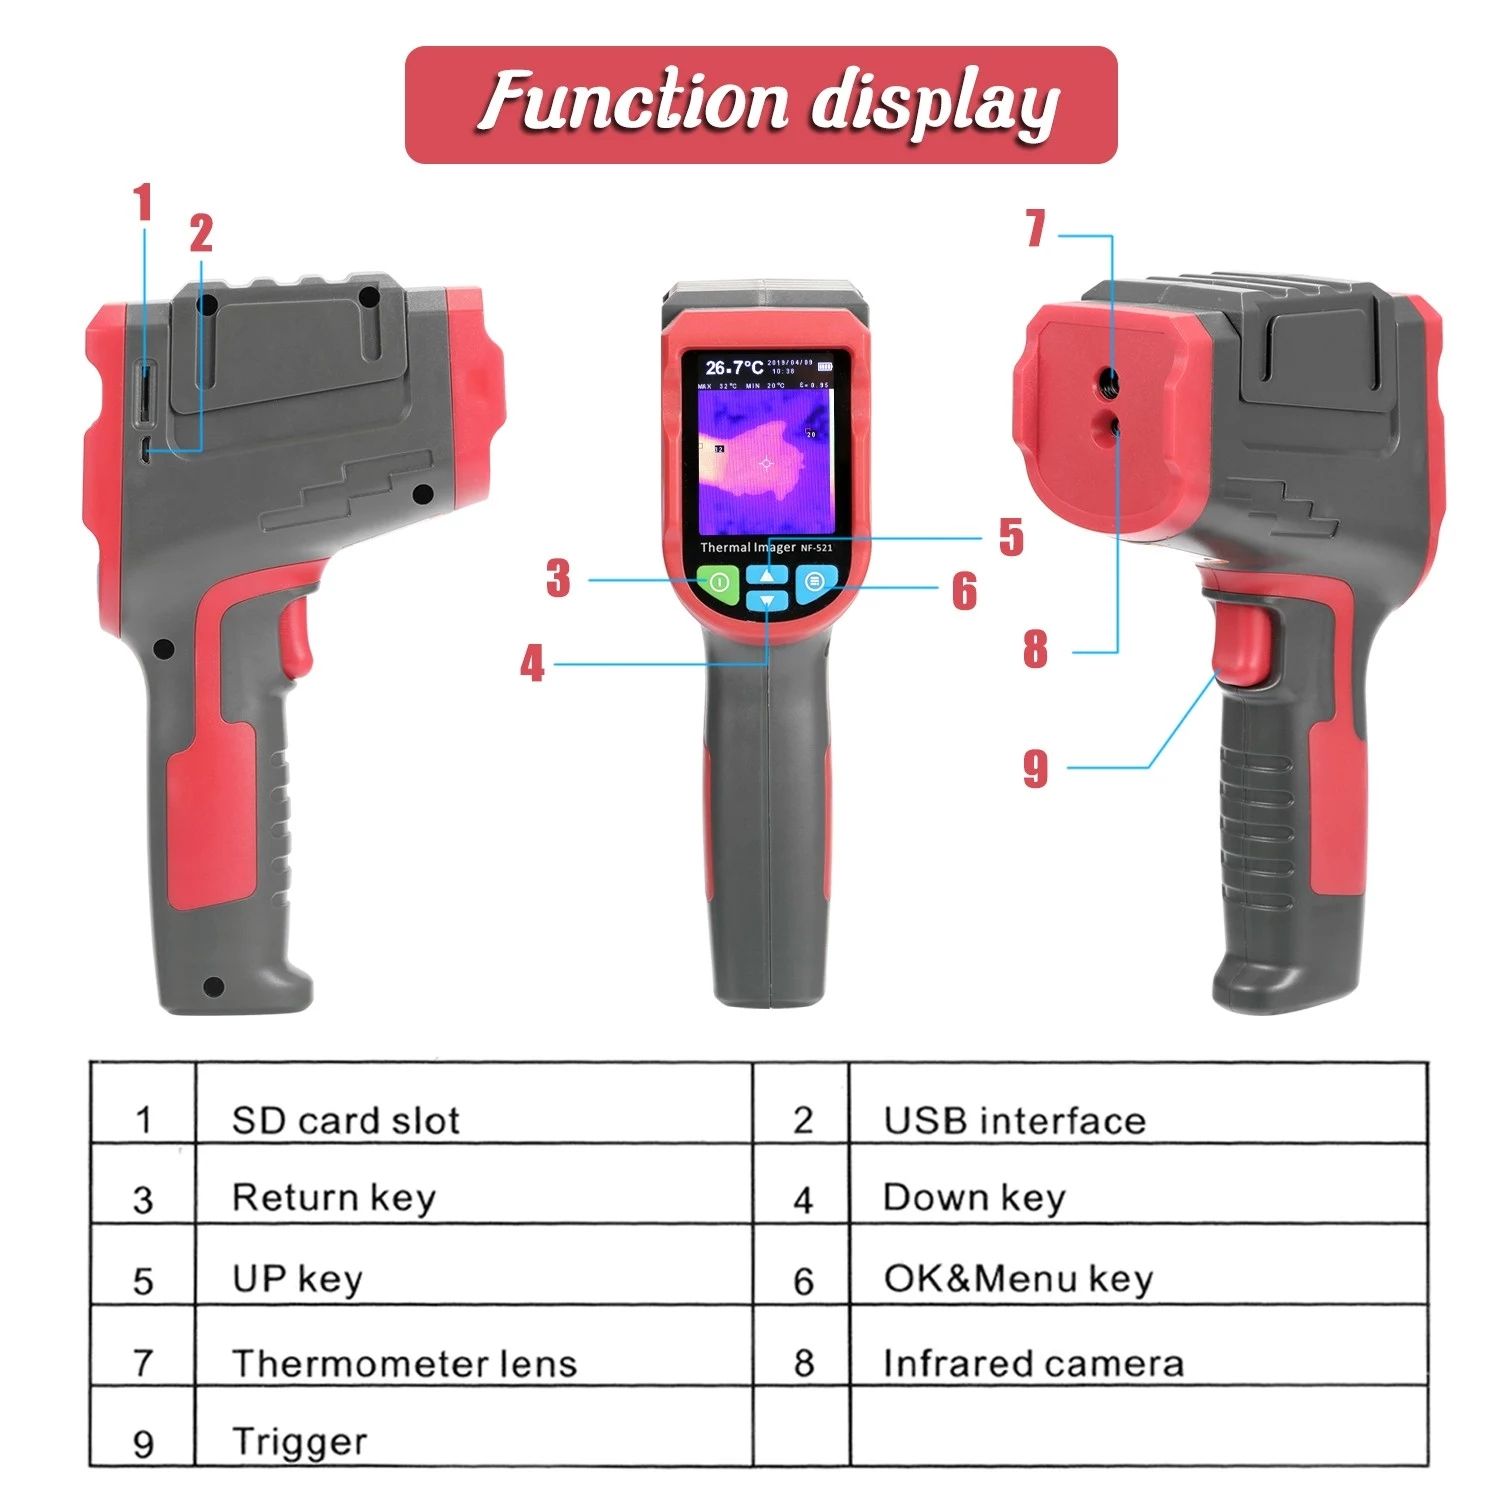 24-Inch-Portable-Infrared-Thermal-Imager-Handheld-Imaging-Camera-Digital-TFT-LCD-Display-Thermometer-1673570